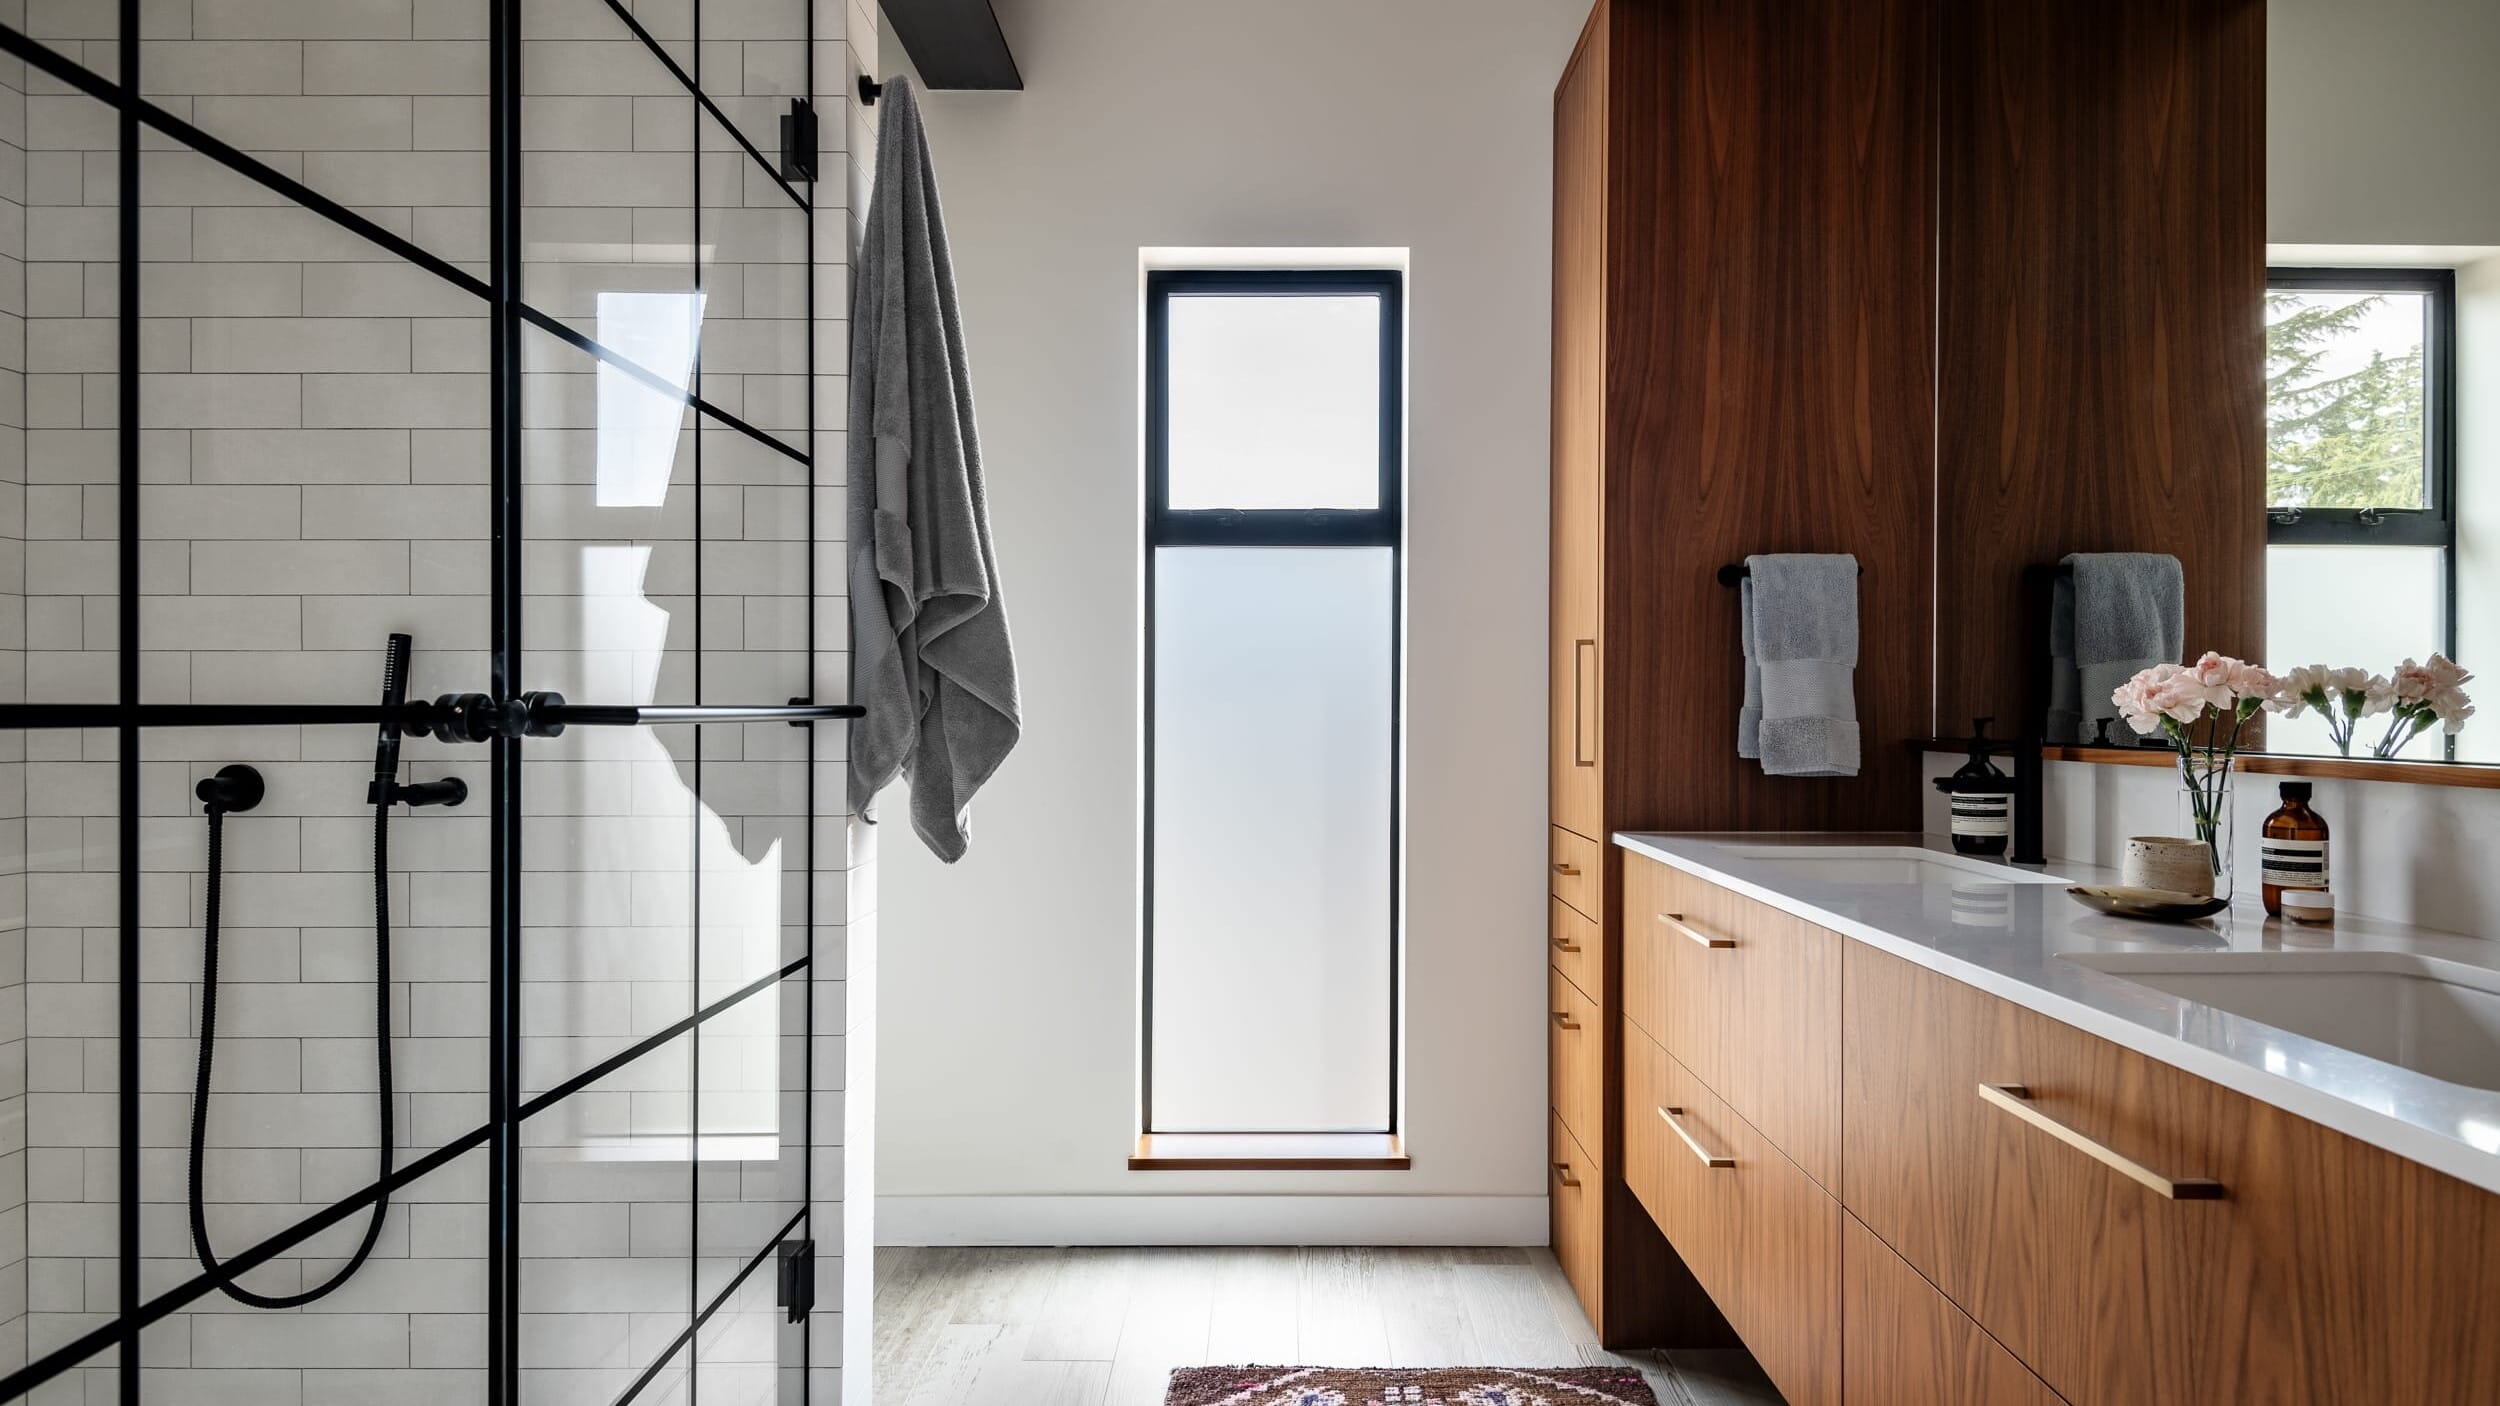 A modern bathroom with wooden cabinets and a glass shower.